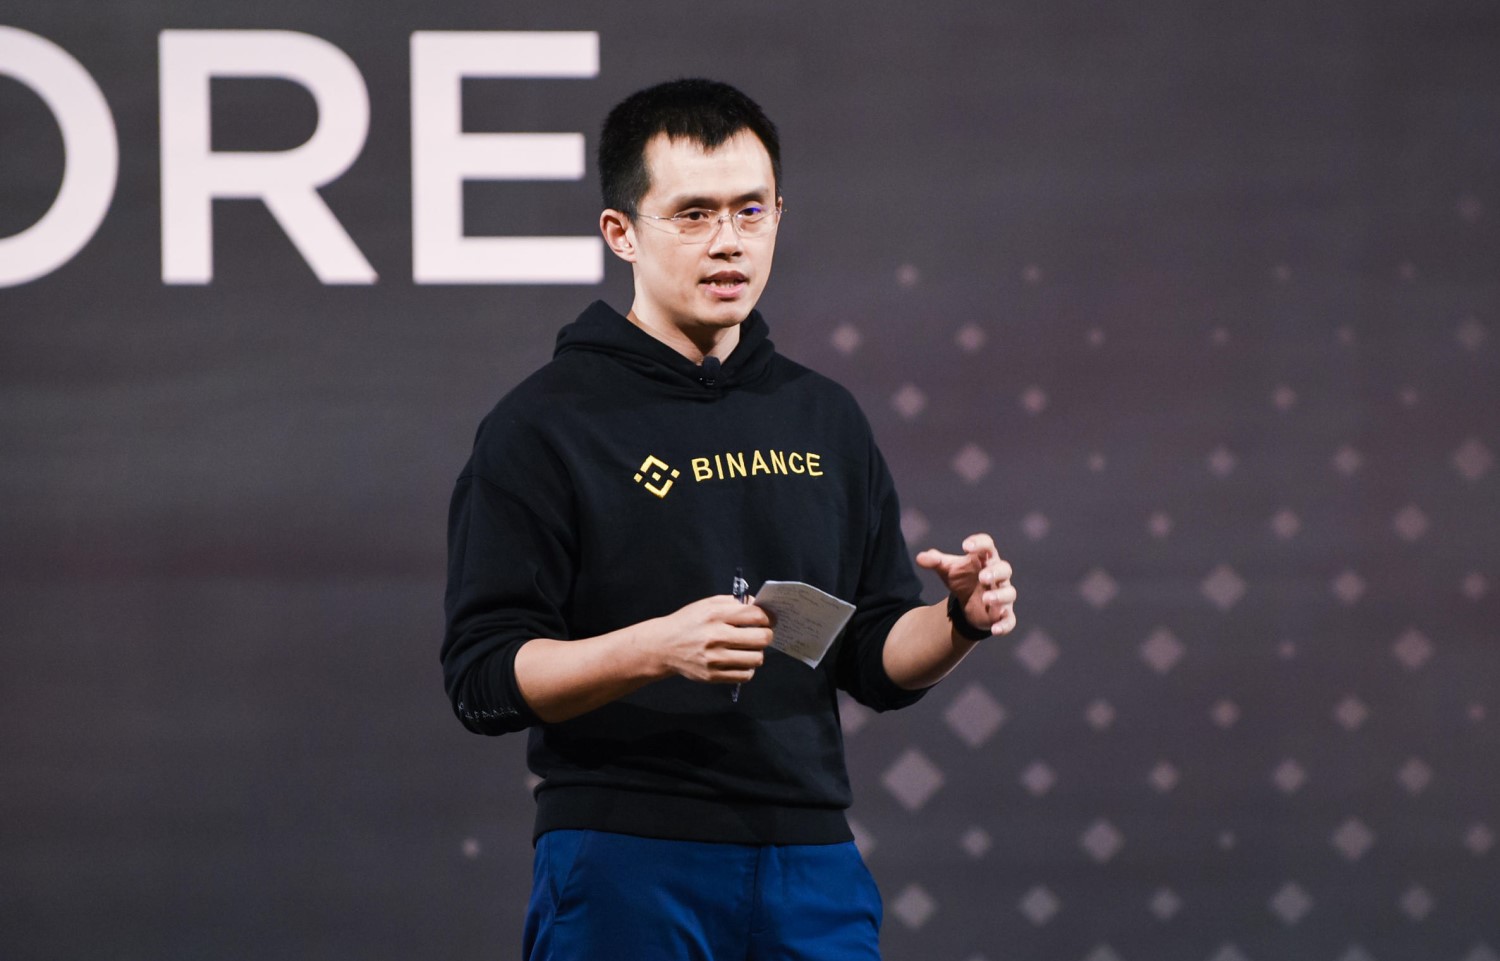 Binance-denies-report-it-was-blocked-from-installing-its-ceo-on-board-of-failing-bank